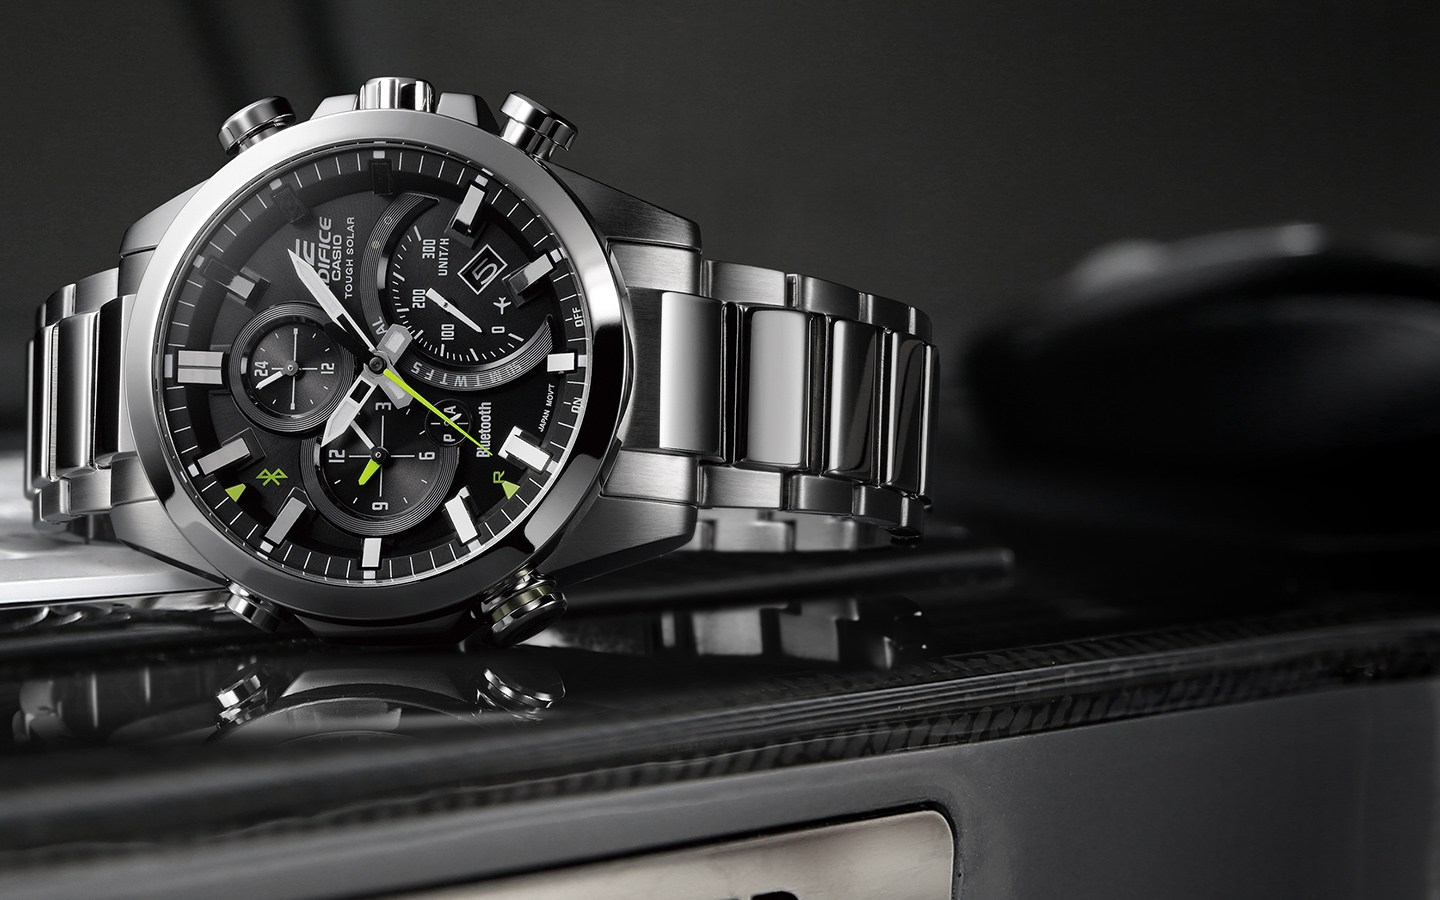 The Casio Edifice EQB-500 Is One Of The Best Looking Smartwatch On